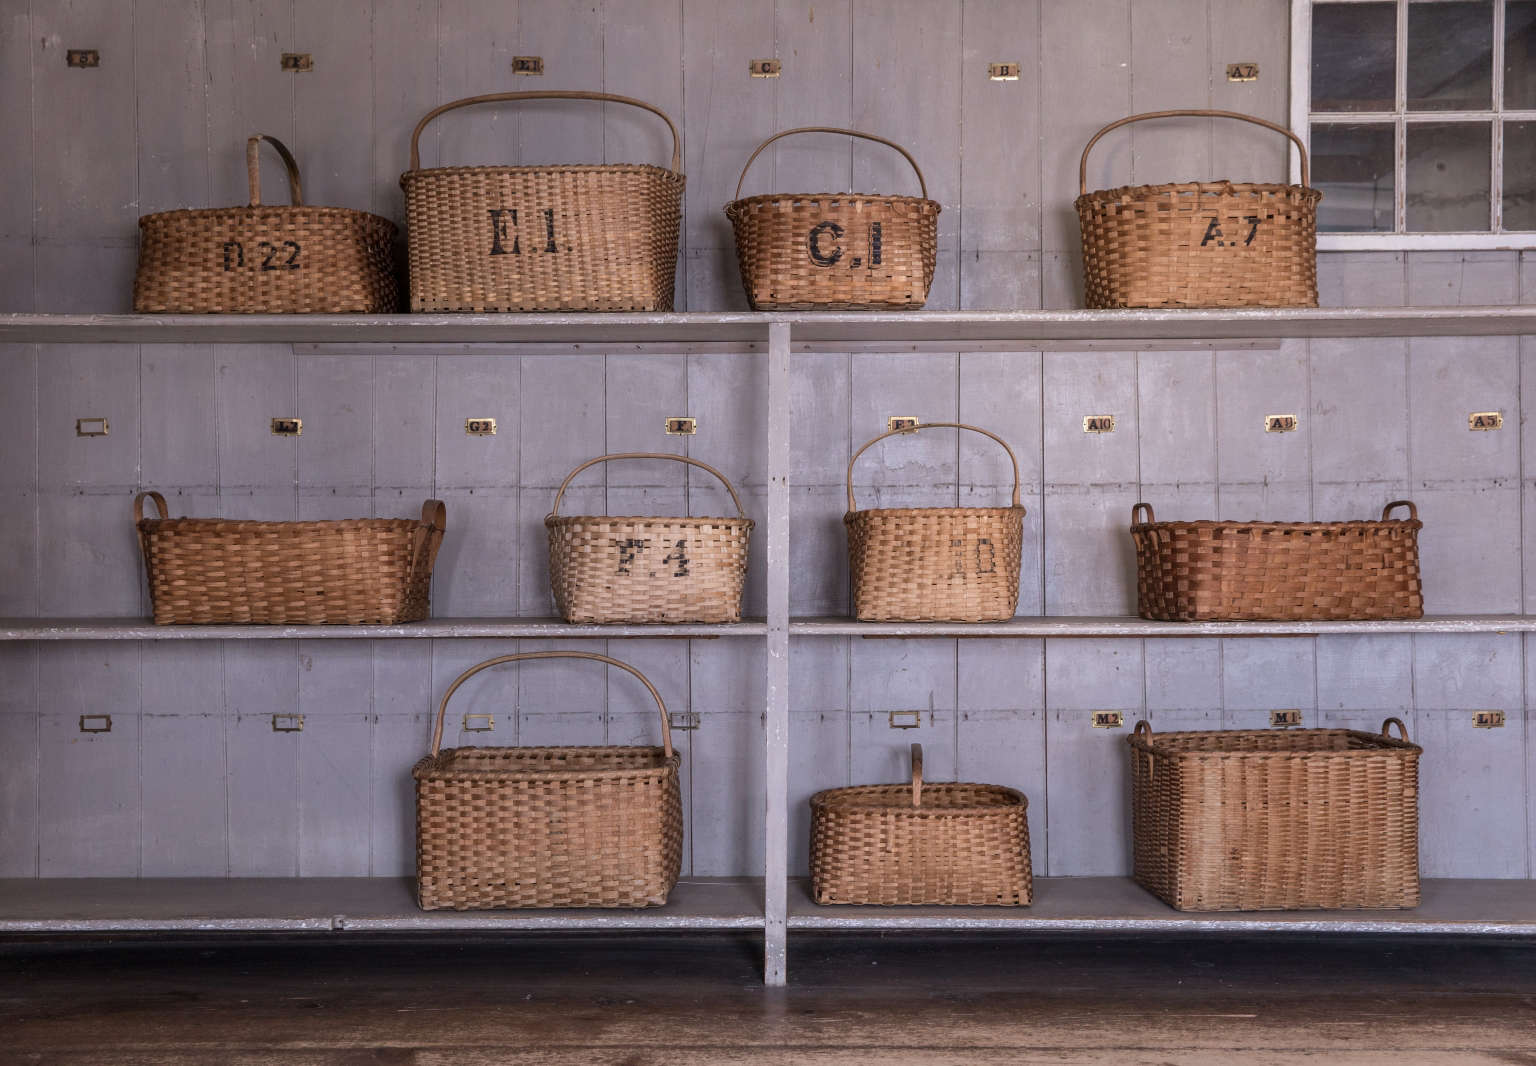 Laundry Baskets at Canterbury Shaker Village, Photo by Erin Little